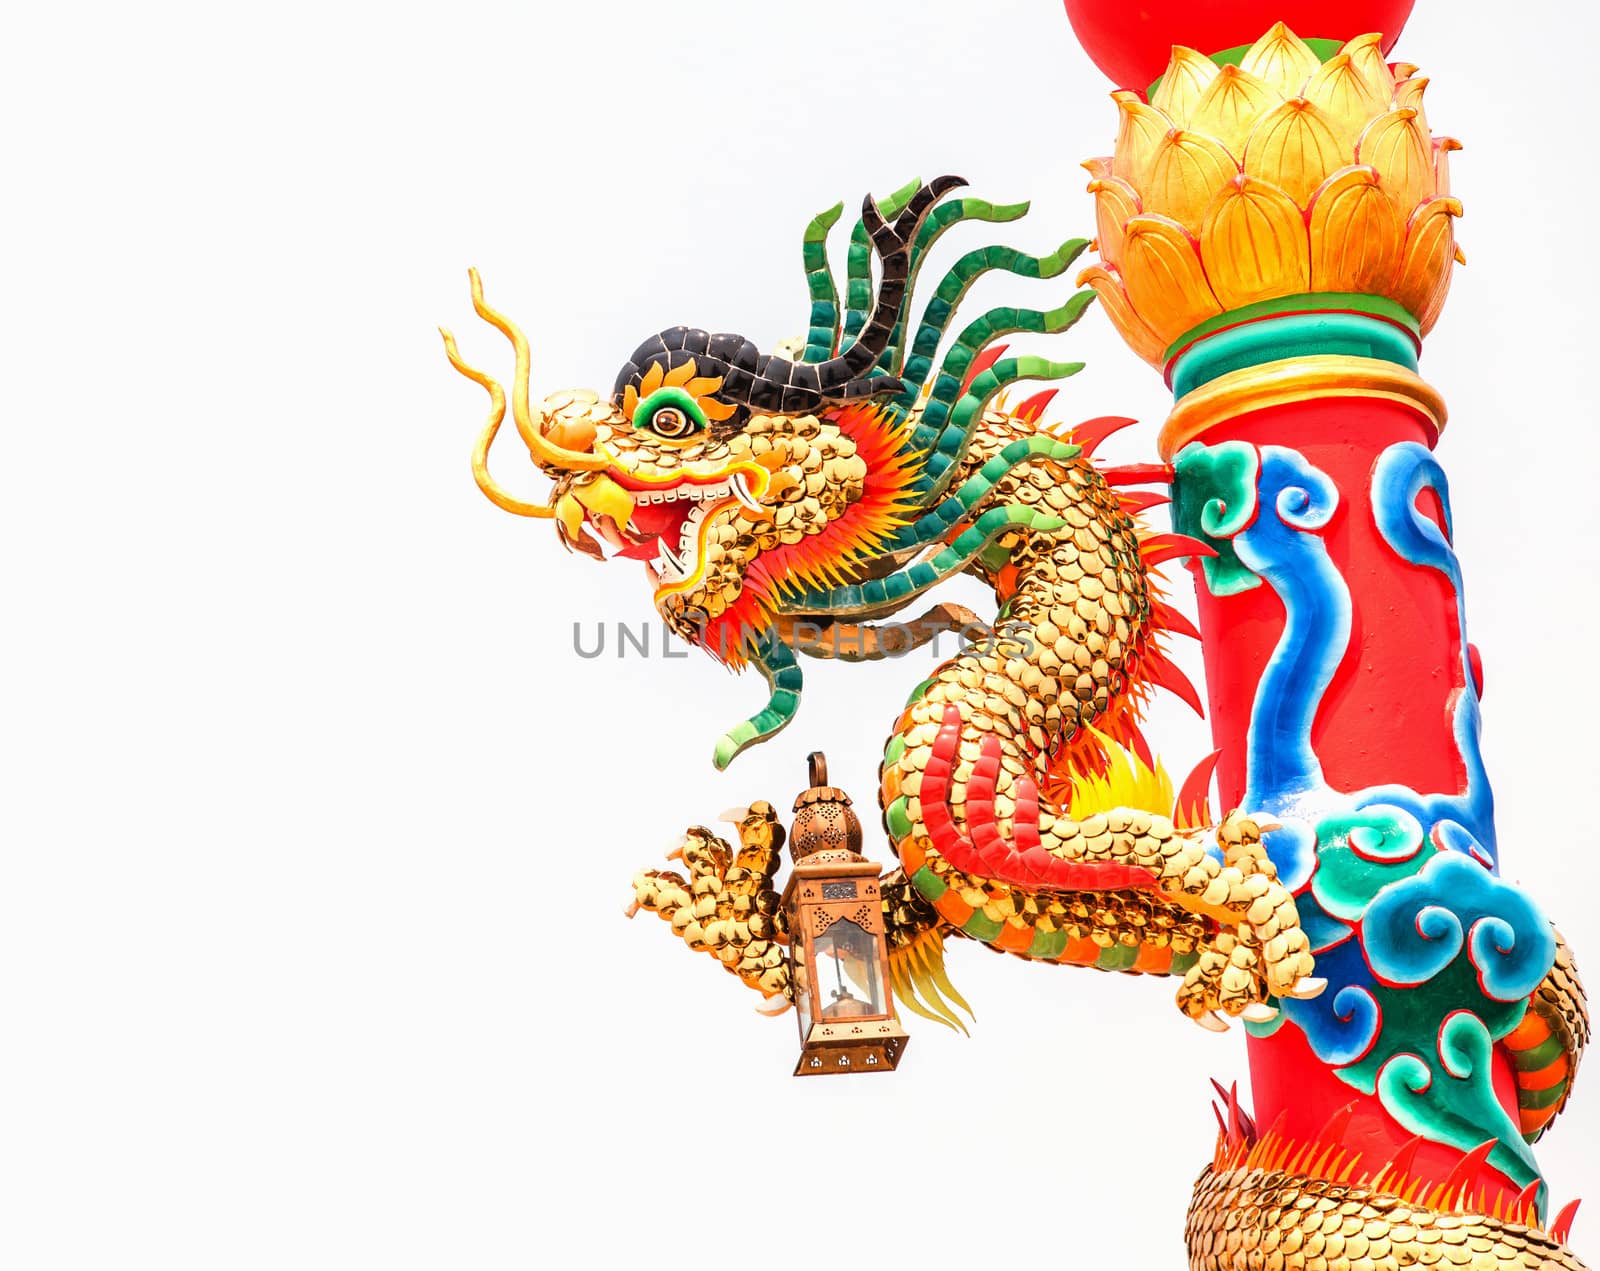 colorful dragon statue on china temple